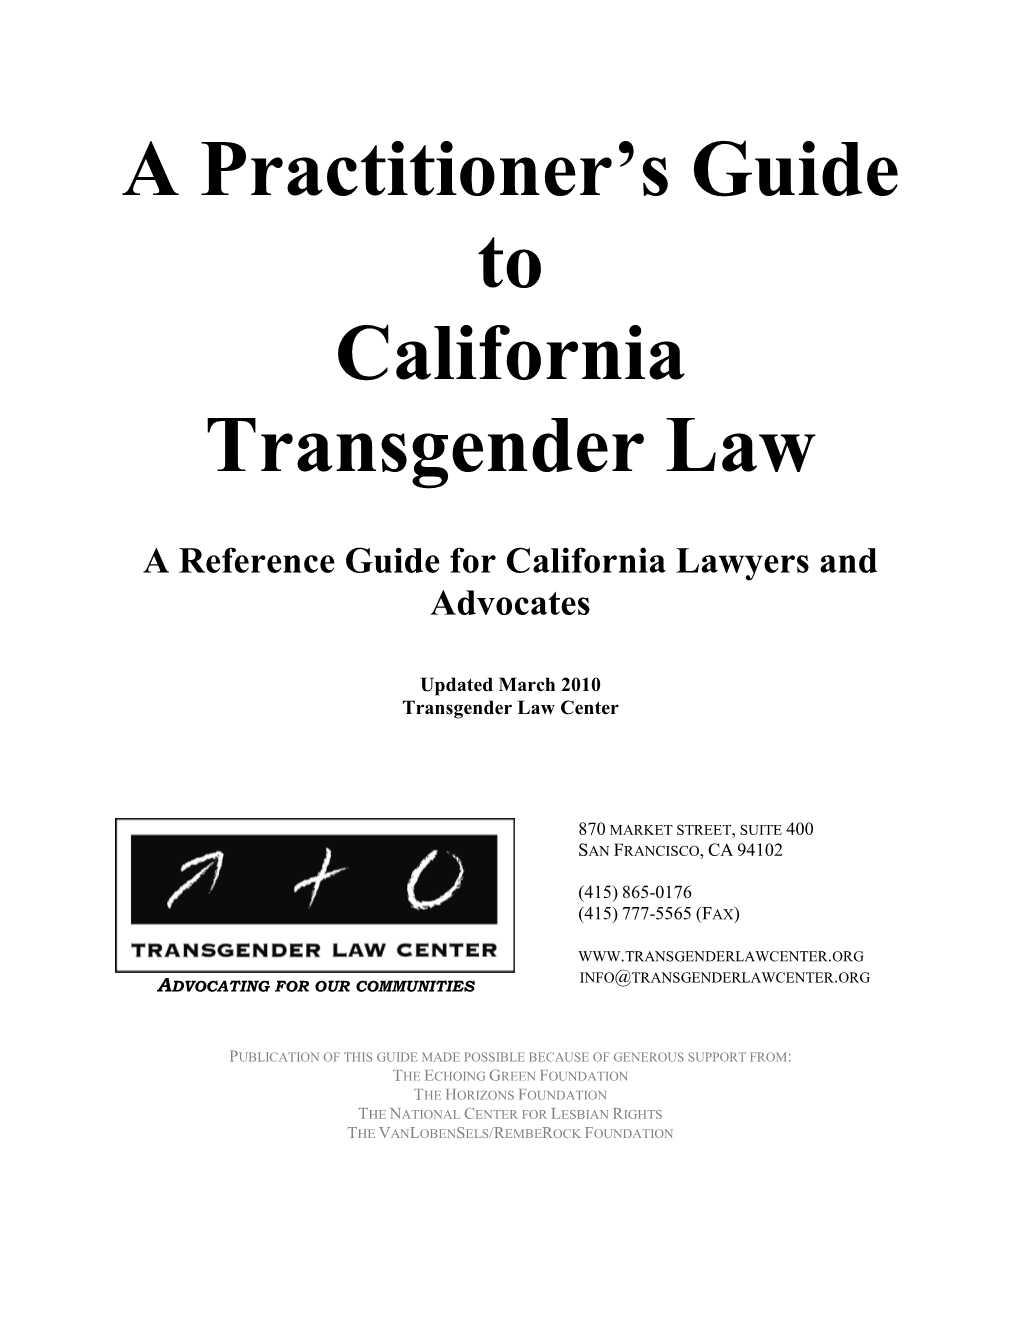 A Practitioner's Guide to California Transgender